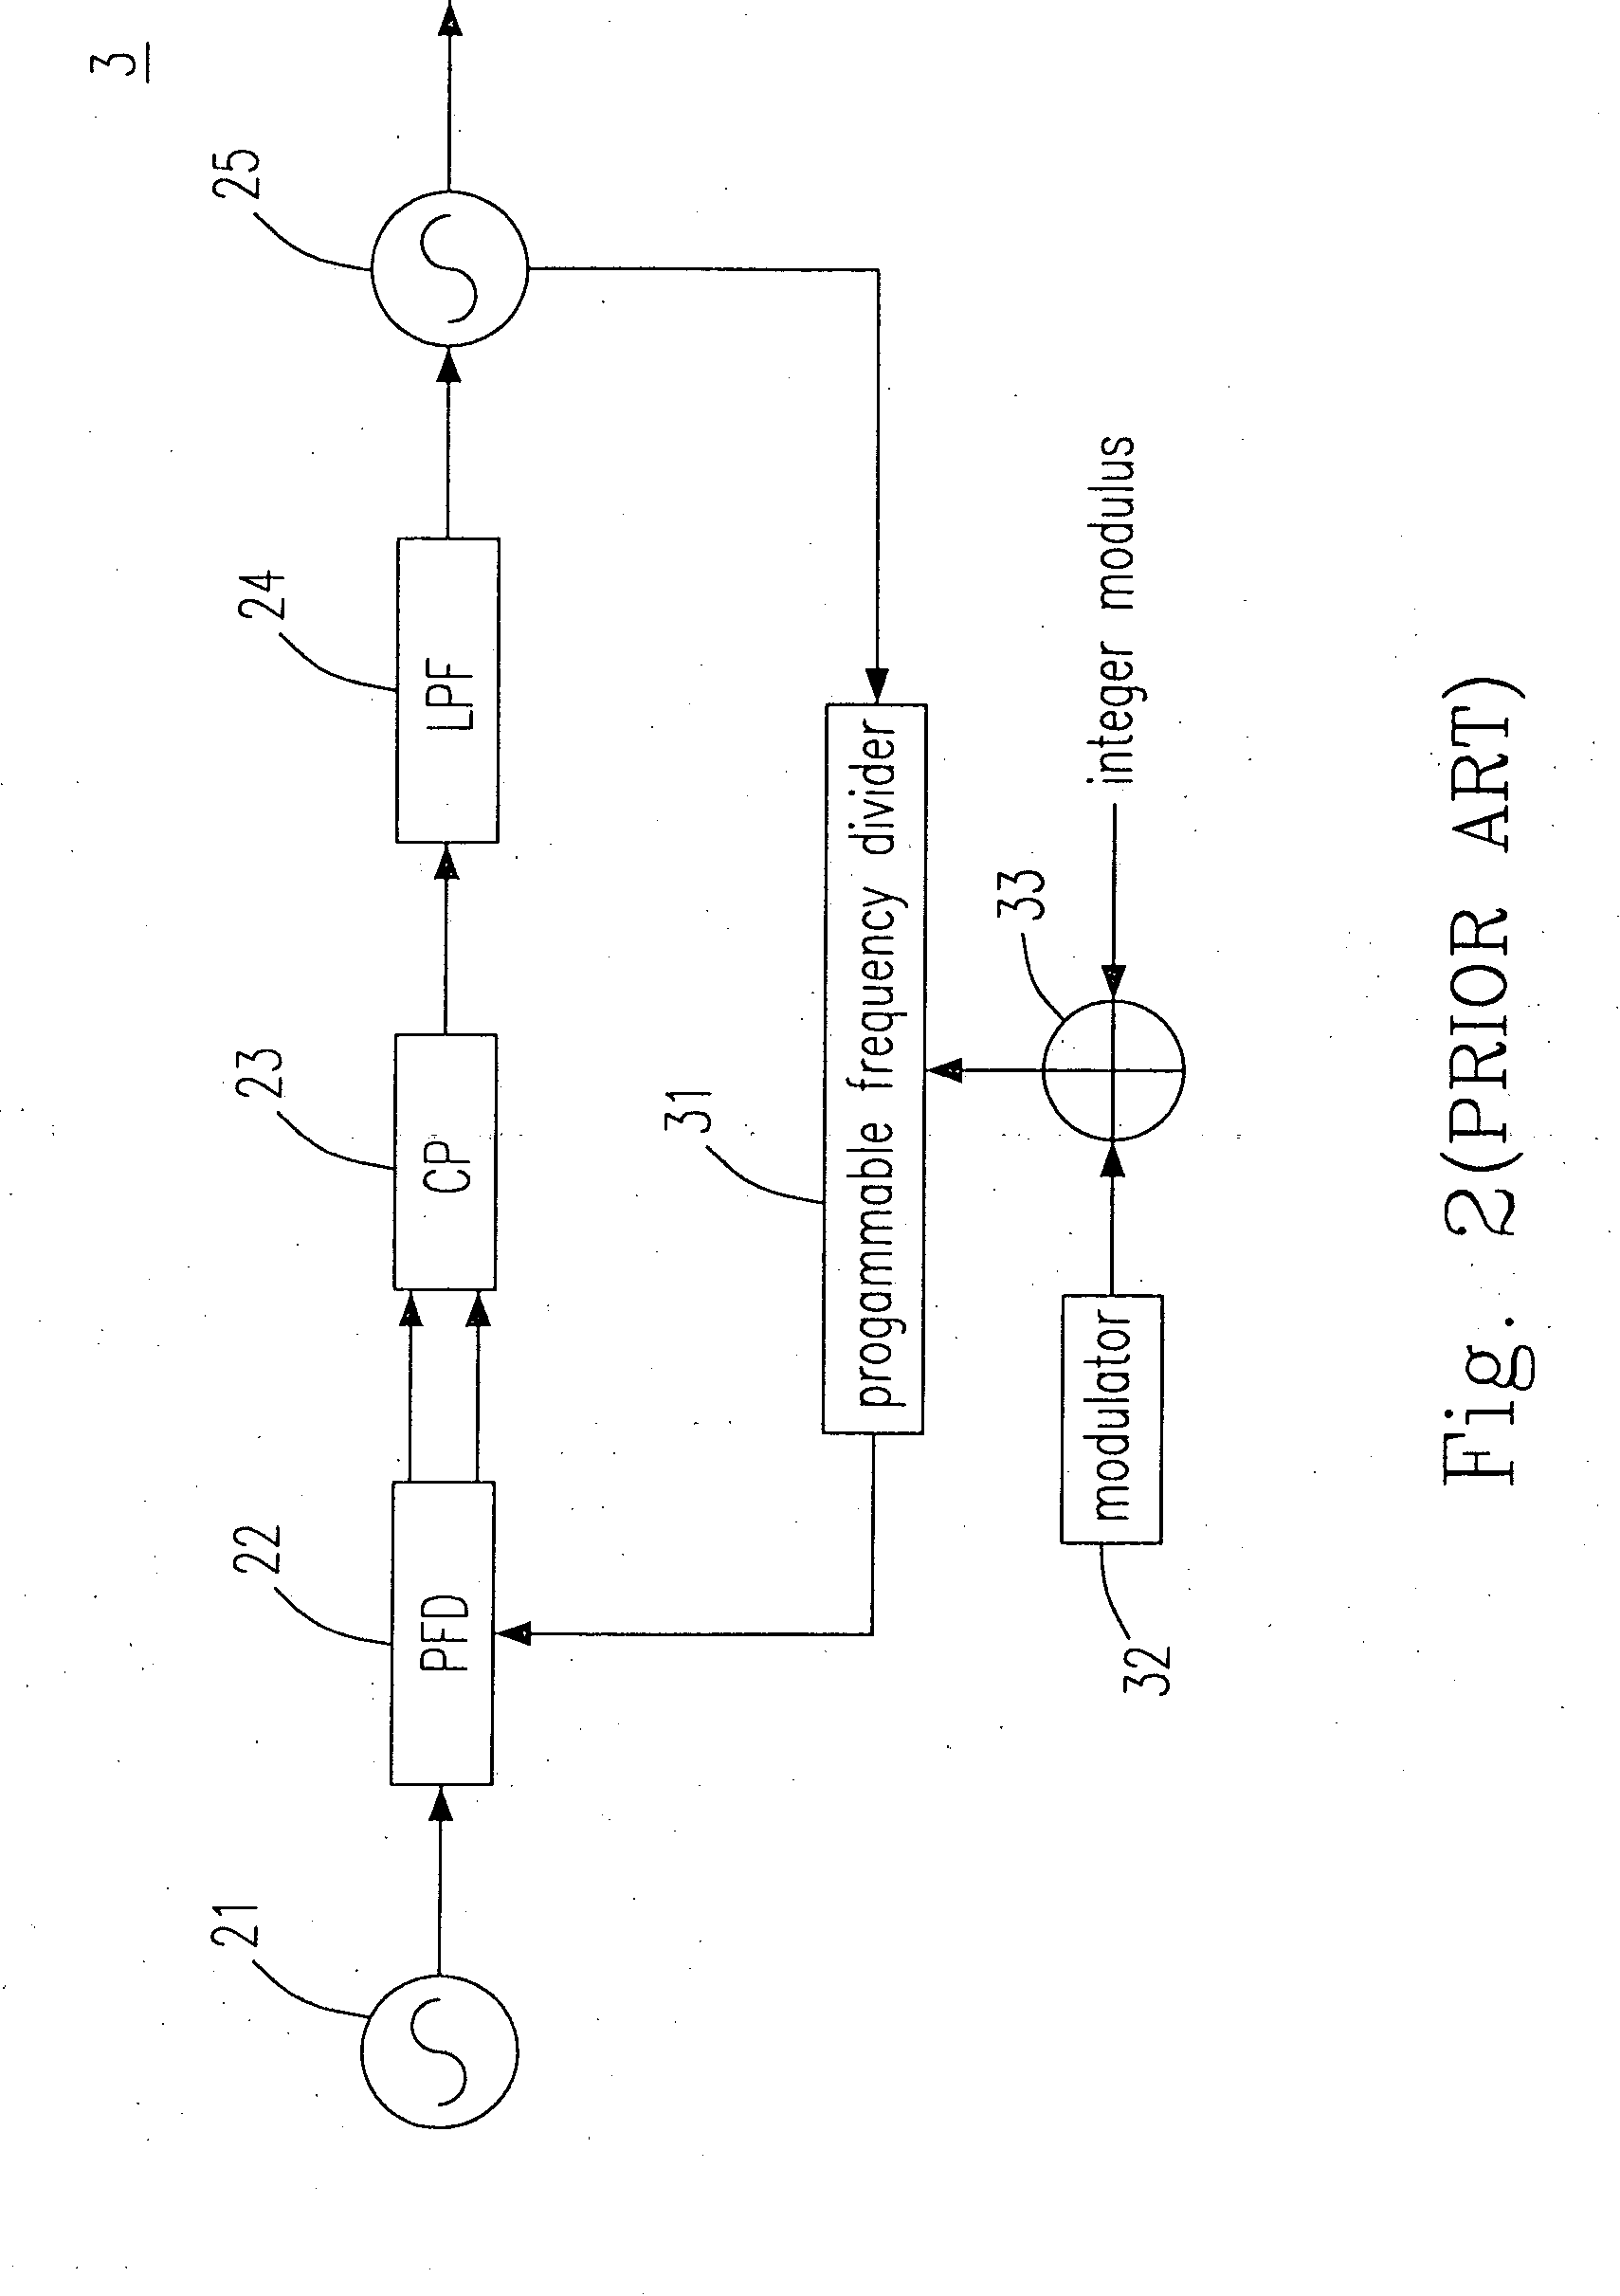 Configuration and controlling method of Fractional-N PLL having fractional frequency divider